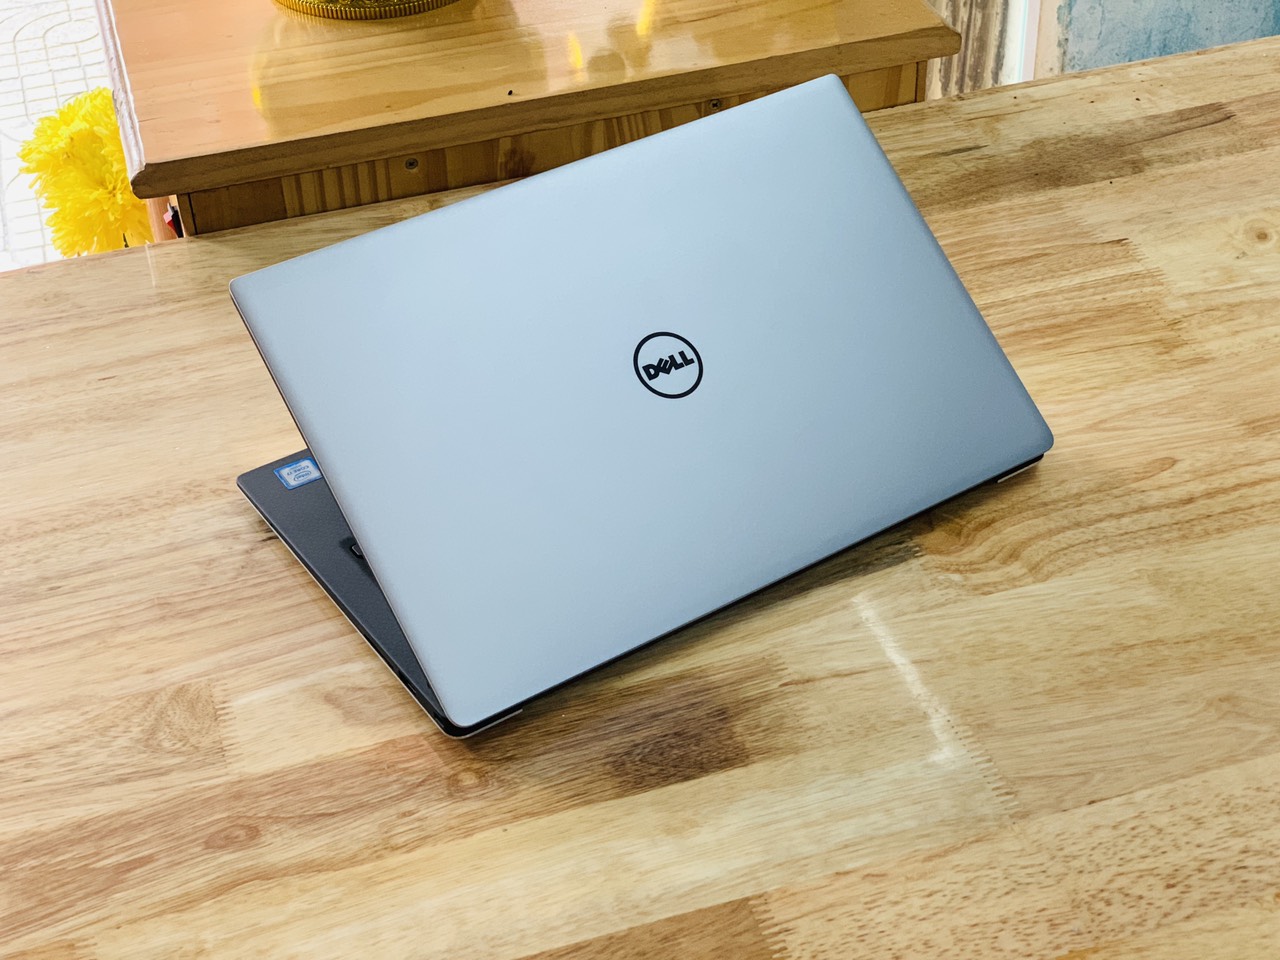 Dell XPS 13 – 9350